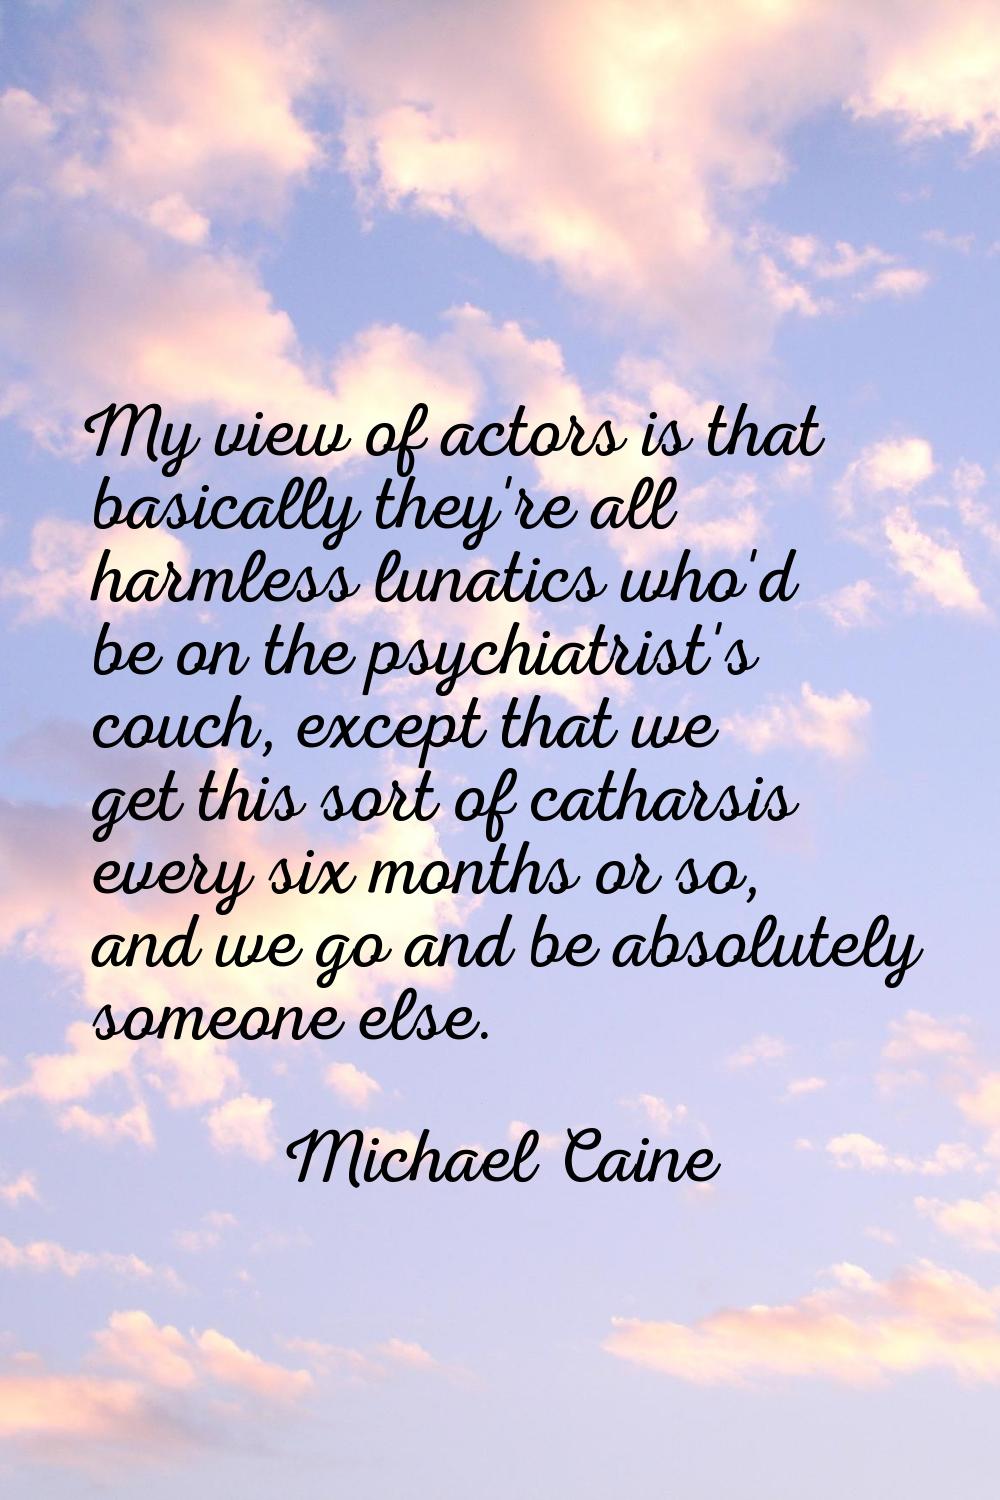 My view of actors is that basically they're all harmless lunatics who'd be on the psychiatrist's co